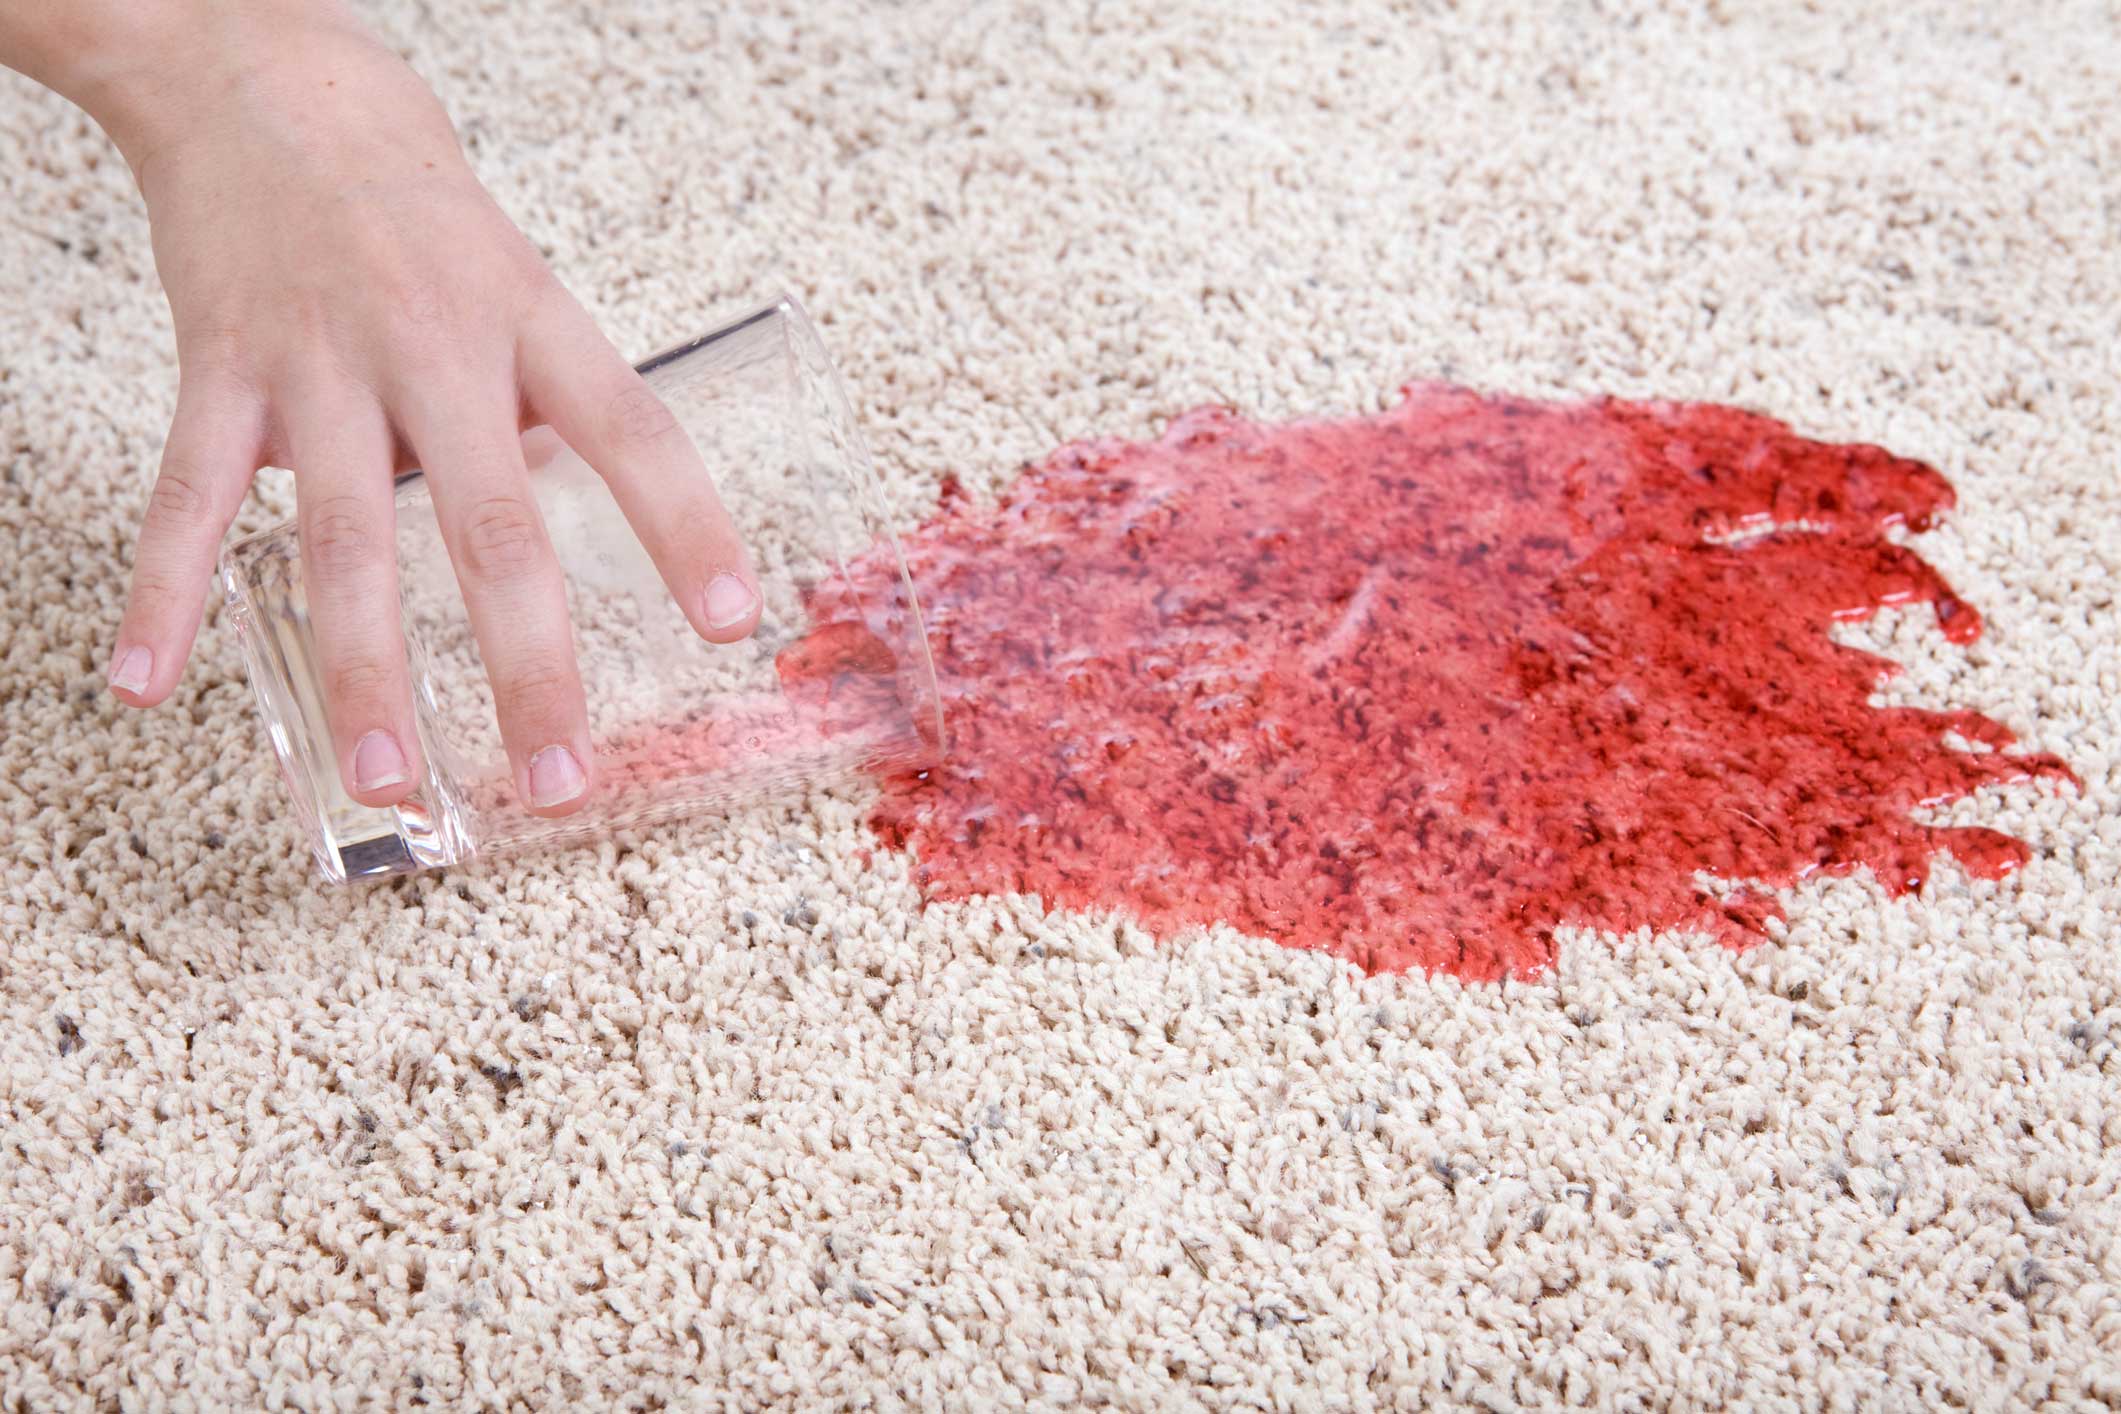 How to Clean Juice From Carpet